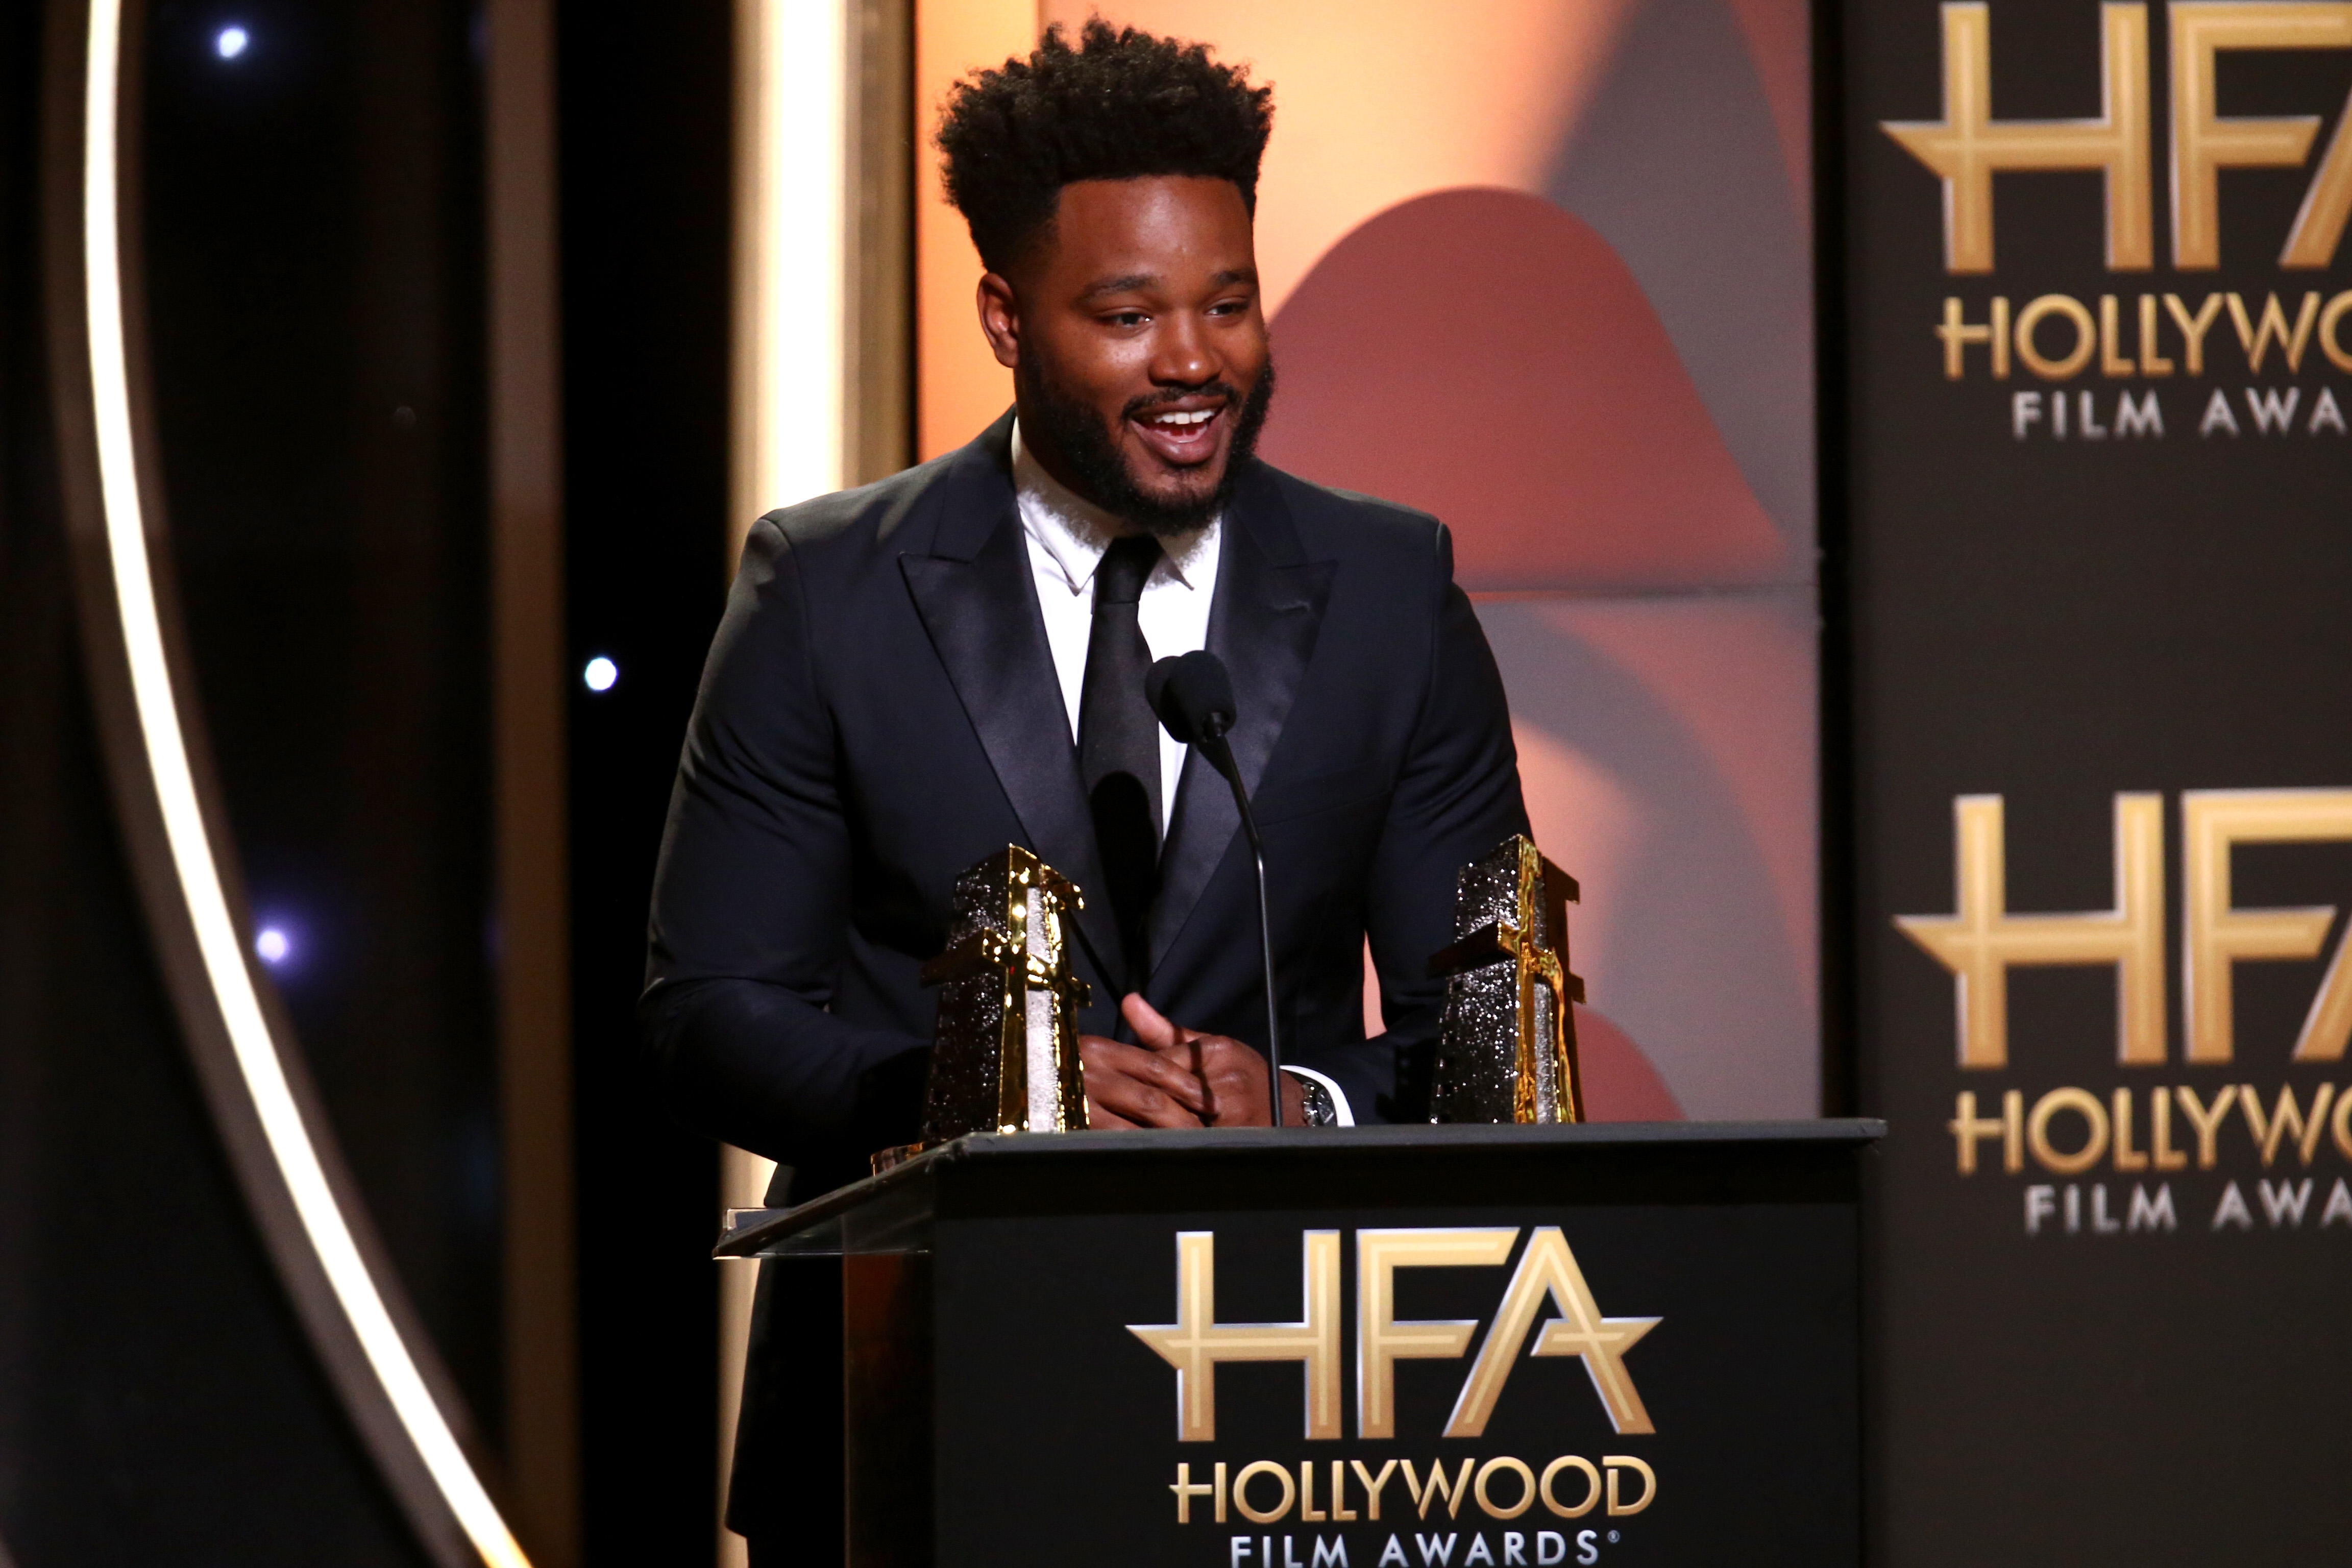 Ryan Coogler accepts the Hollywood Film Award for "Black Panther" onstage during the 22nd Annual Hollywood Film Awards at The Beverly Hilton Hotel on November 4, 2018 in Beverly Hills, California. (Tommaso Boddi—Getty Images)